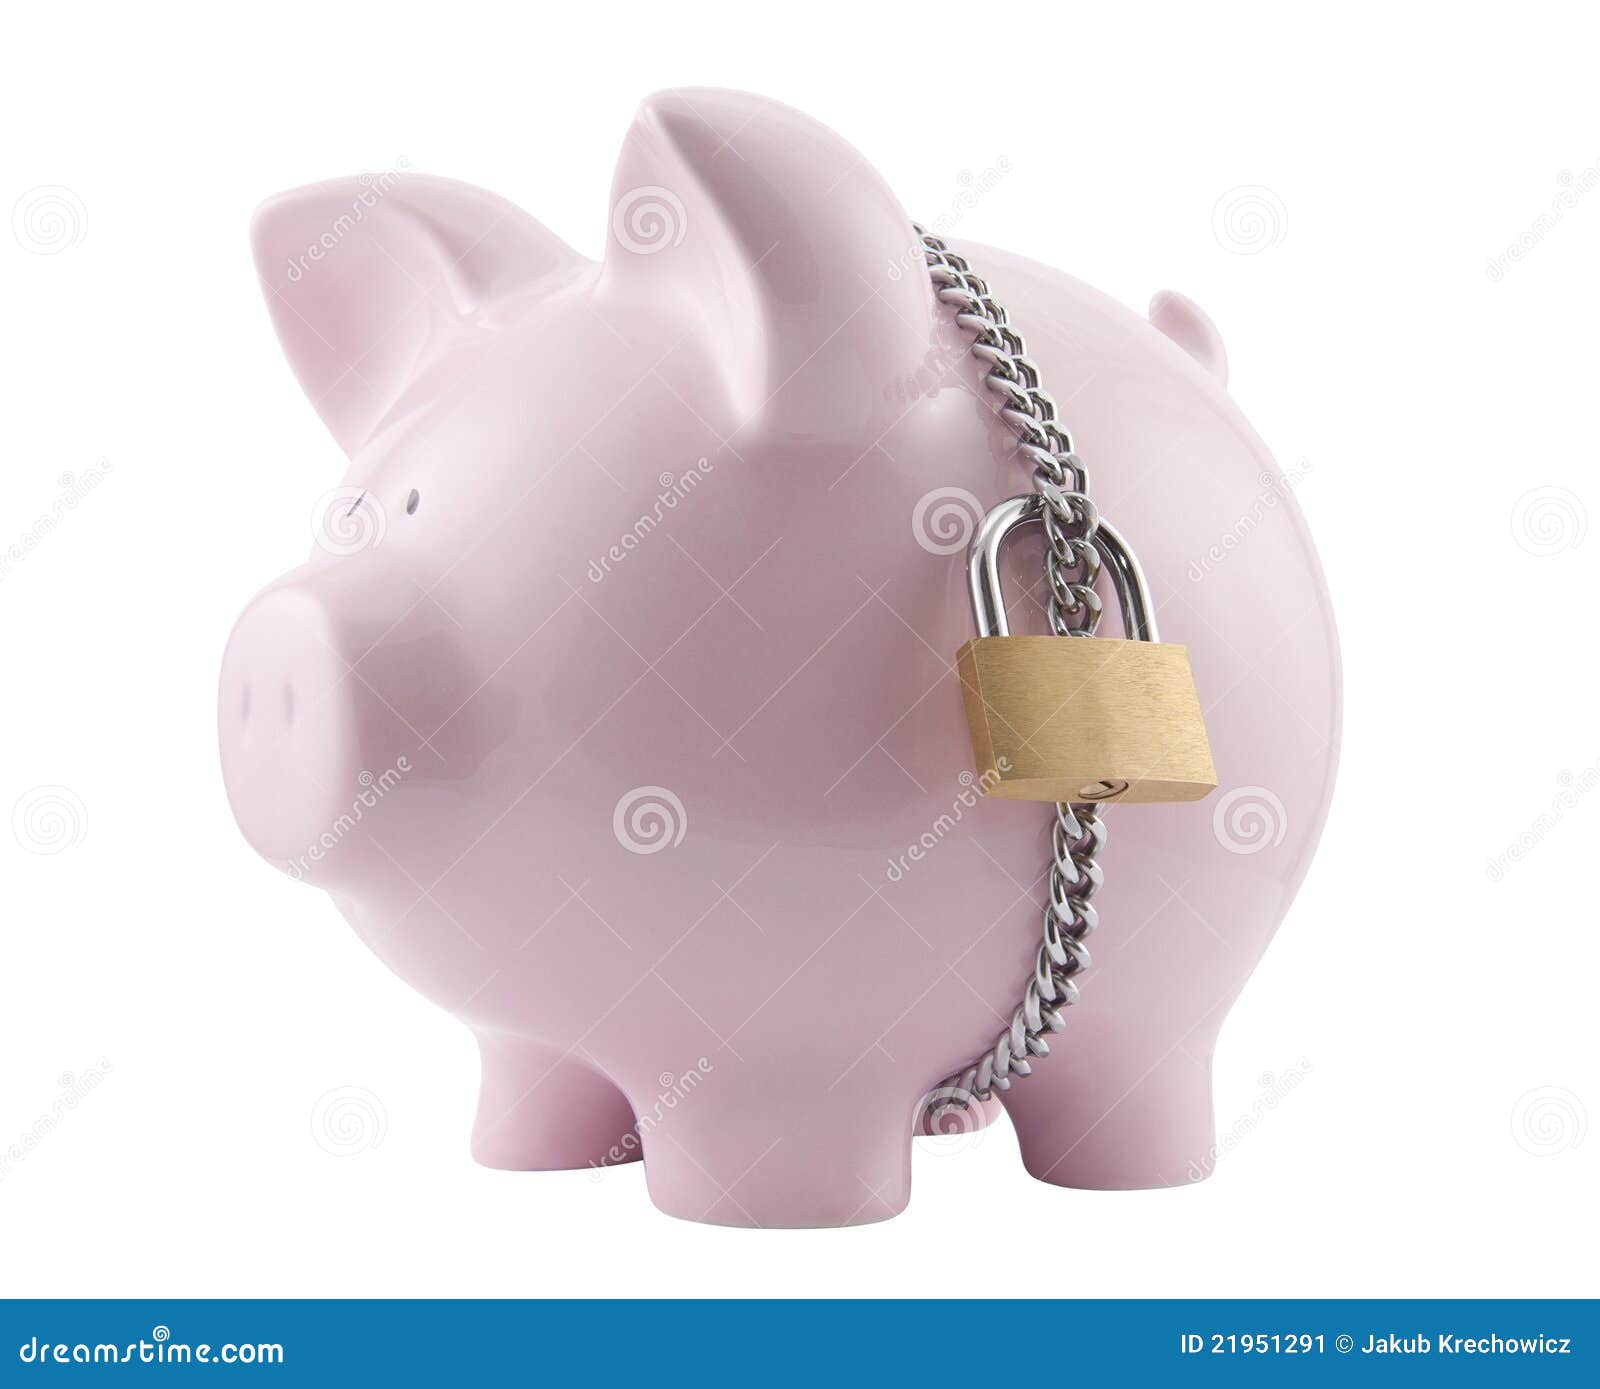 piggy bank secured with padlock